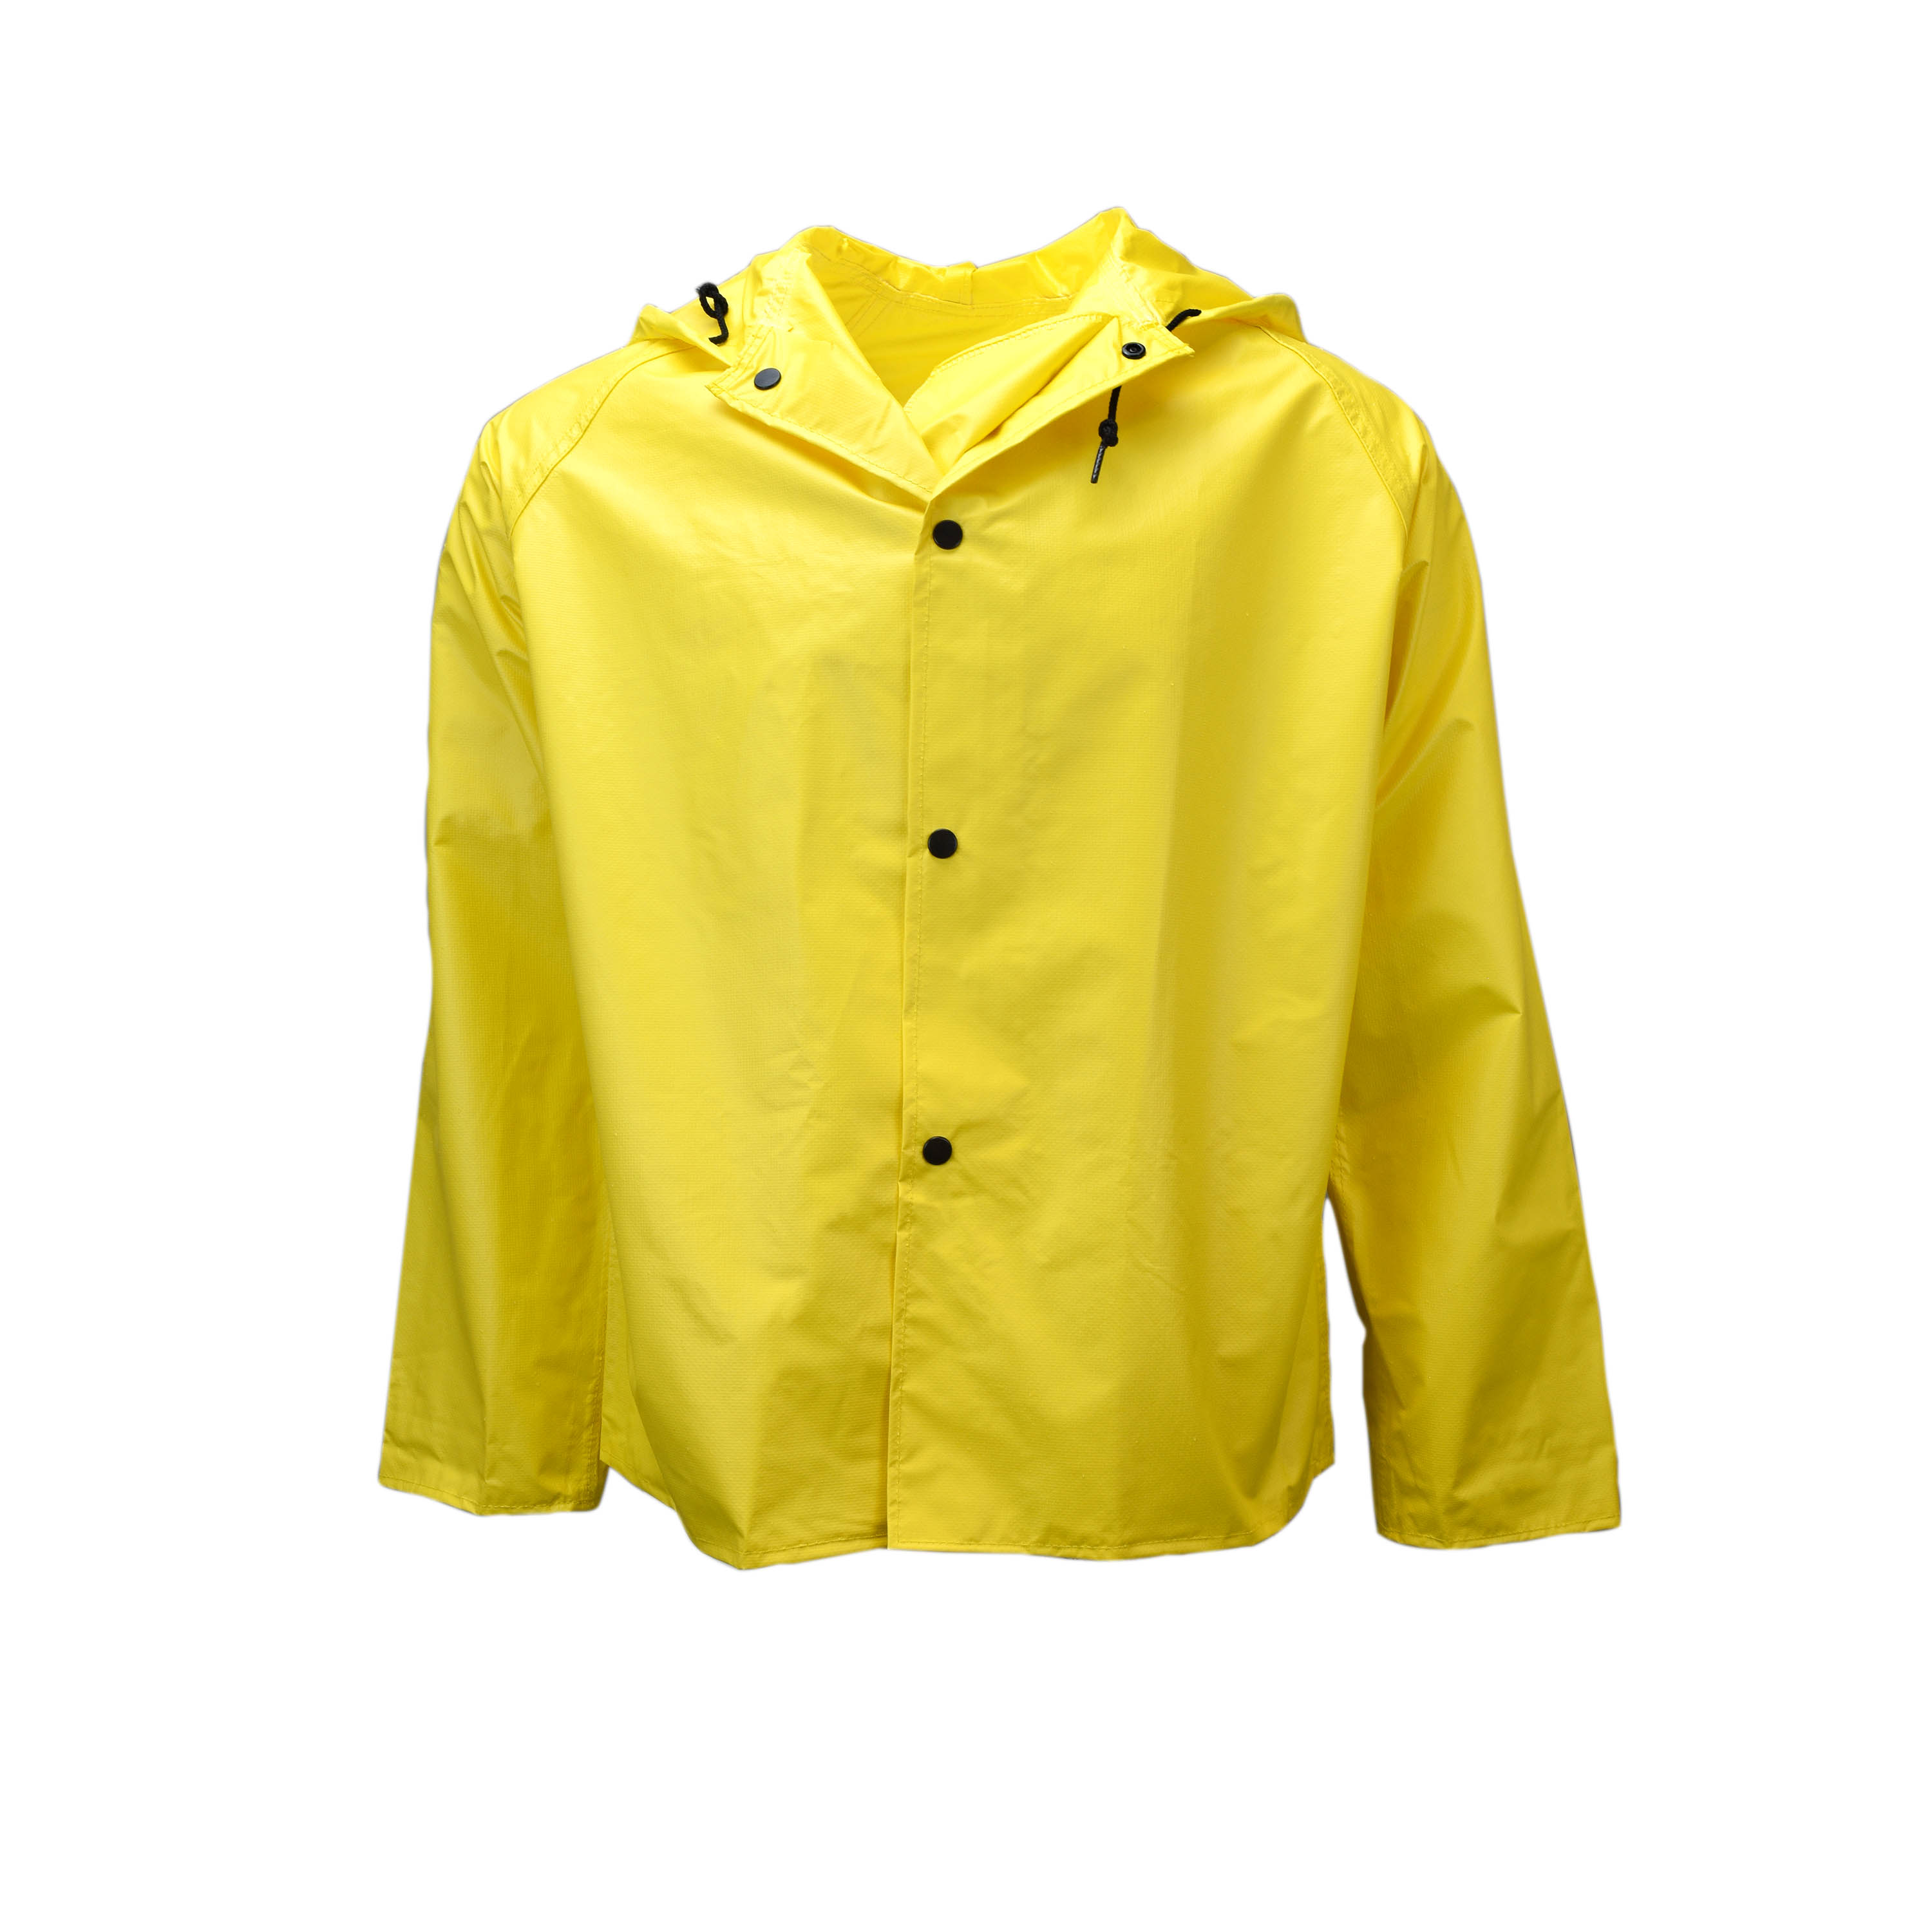 Universal 35 Jacket with Hood - Safety Yellow - Size 5X